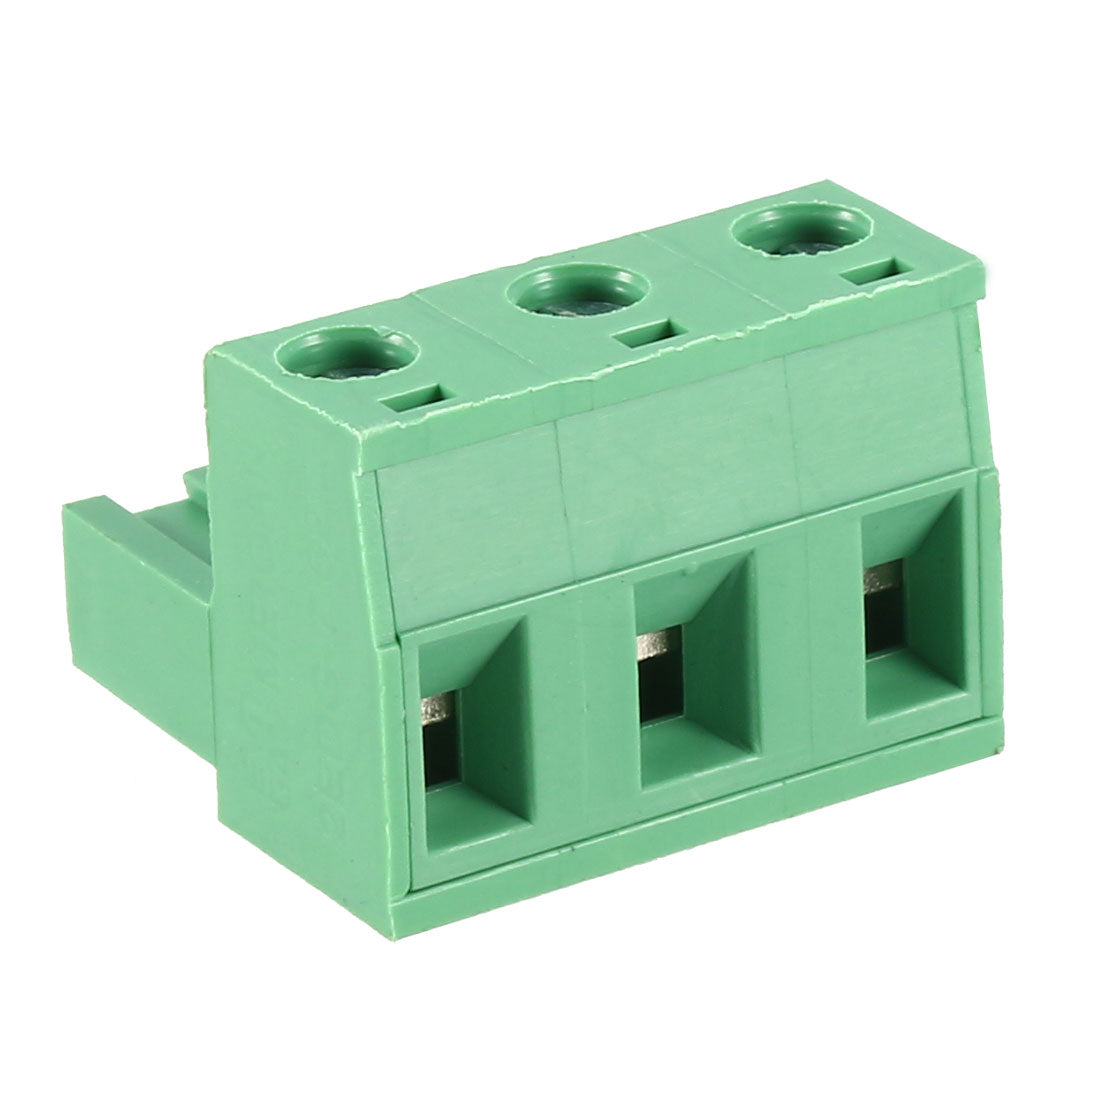 uxcell Uxcell 10Pcs AC300V 15A 7.62mm Pitch 3P Flat Angle Needle Seat Insert-In PCB Terminal Block Connector green